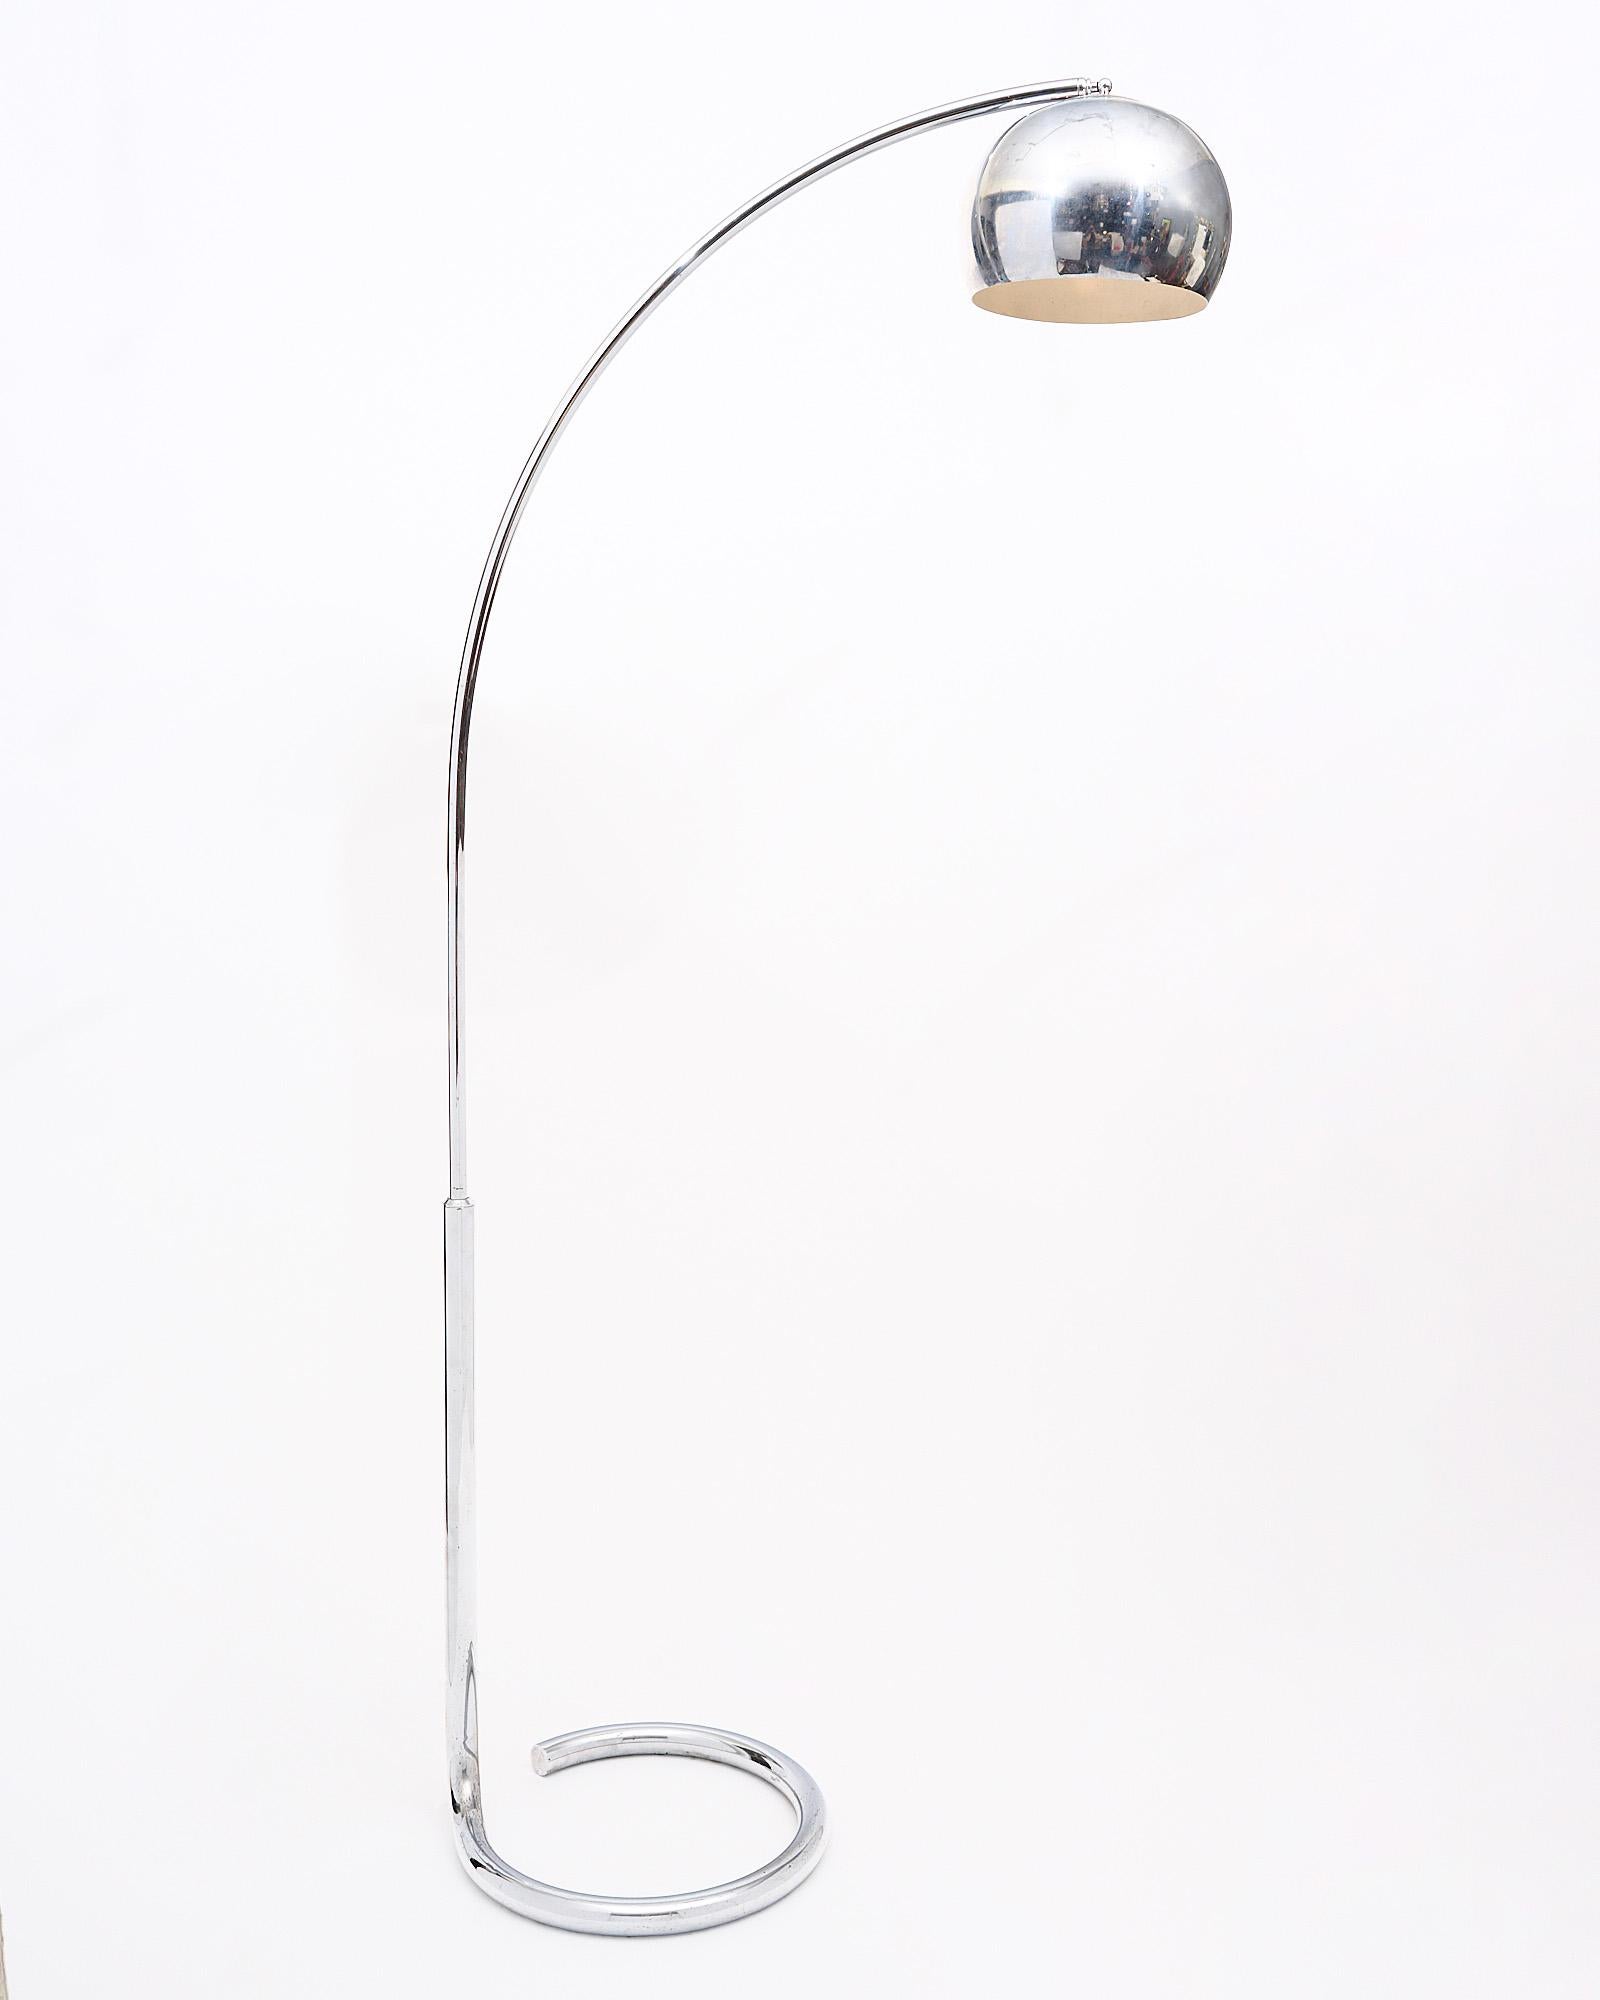 This unique vintage French floor lamp, a funky icon of the 50s and 60s, boasts a distinctive feature that sets it apart: the base gracefully curves up into the arch of the lamp. The length of the lamp is adjustable and extends to around 60”. Crafted